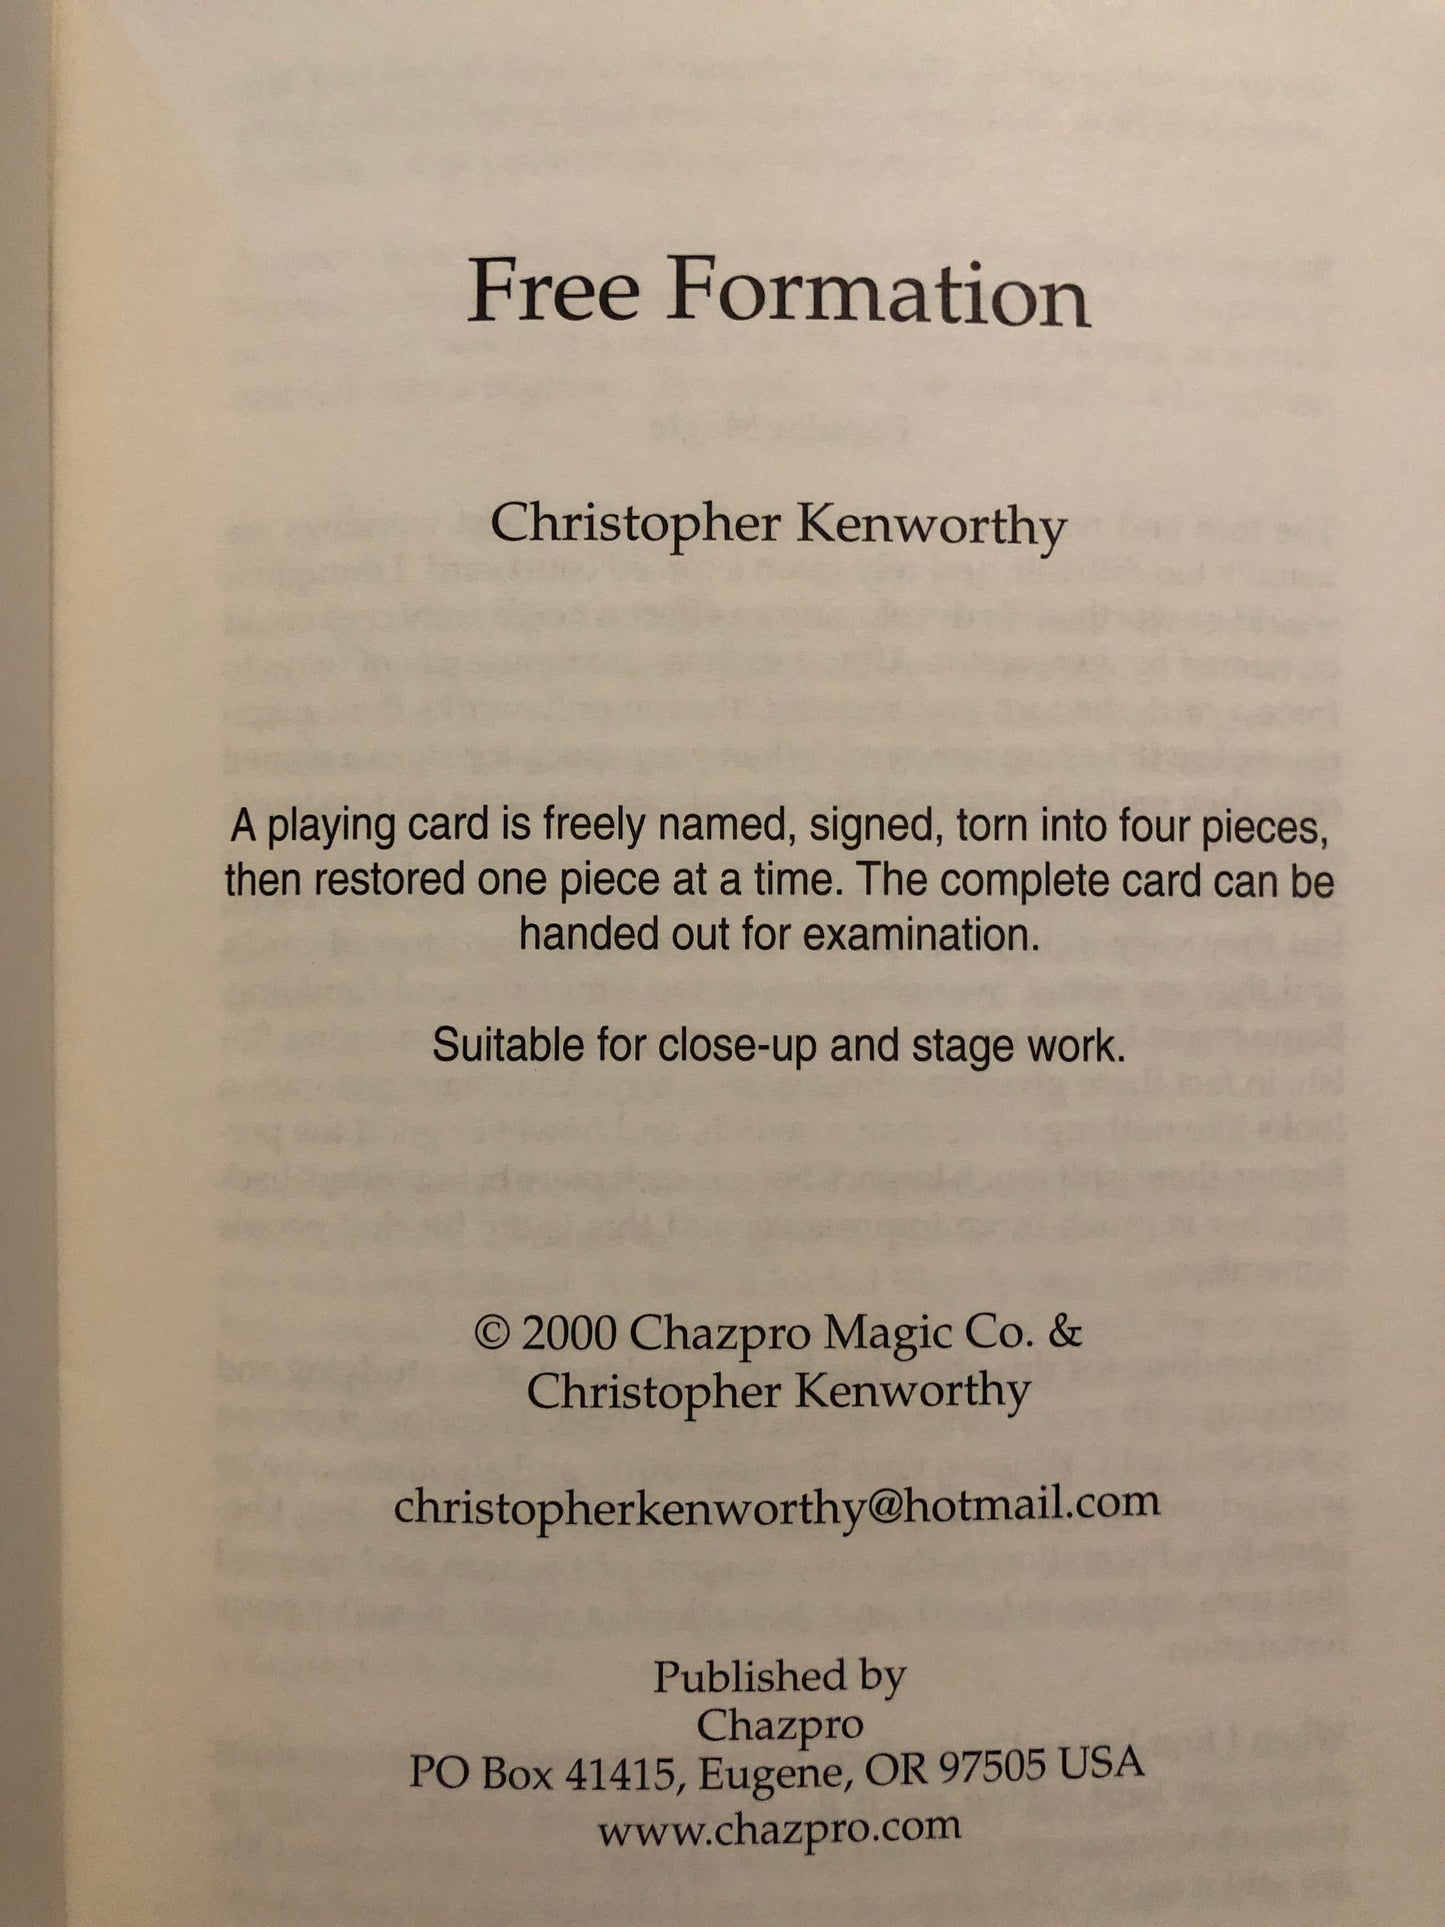 Free Formation - Christopher Kenworthy